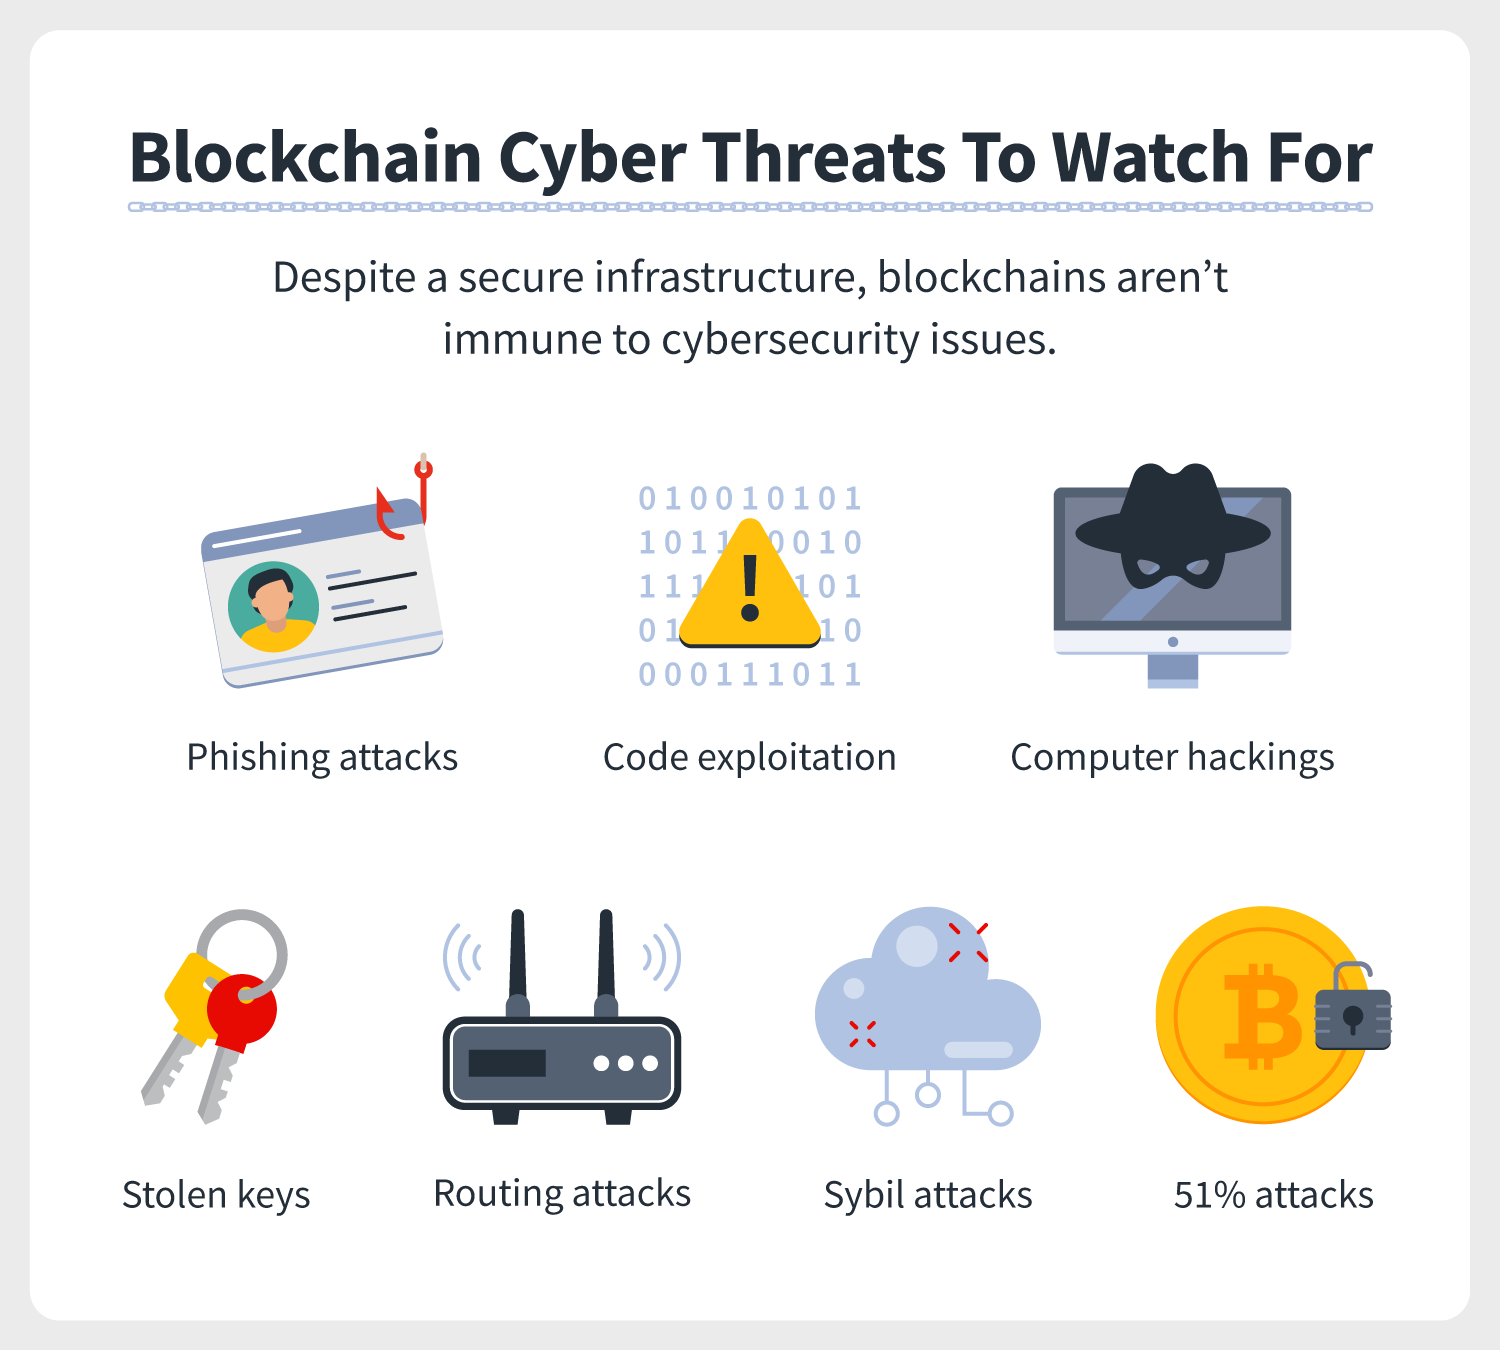 seven icons represent blockchain cyber threats to watch for, including phishing attacks, code exploitation, computer hackings, stolen keys, routing attacks, Sybil attacks, and 51% attacks